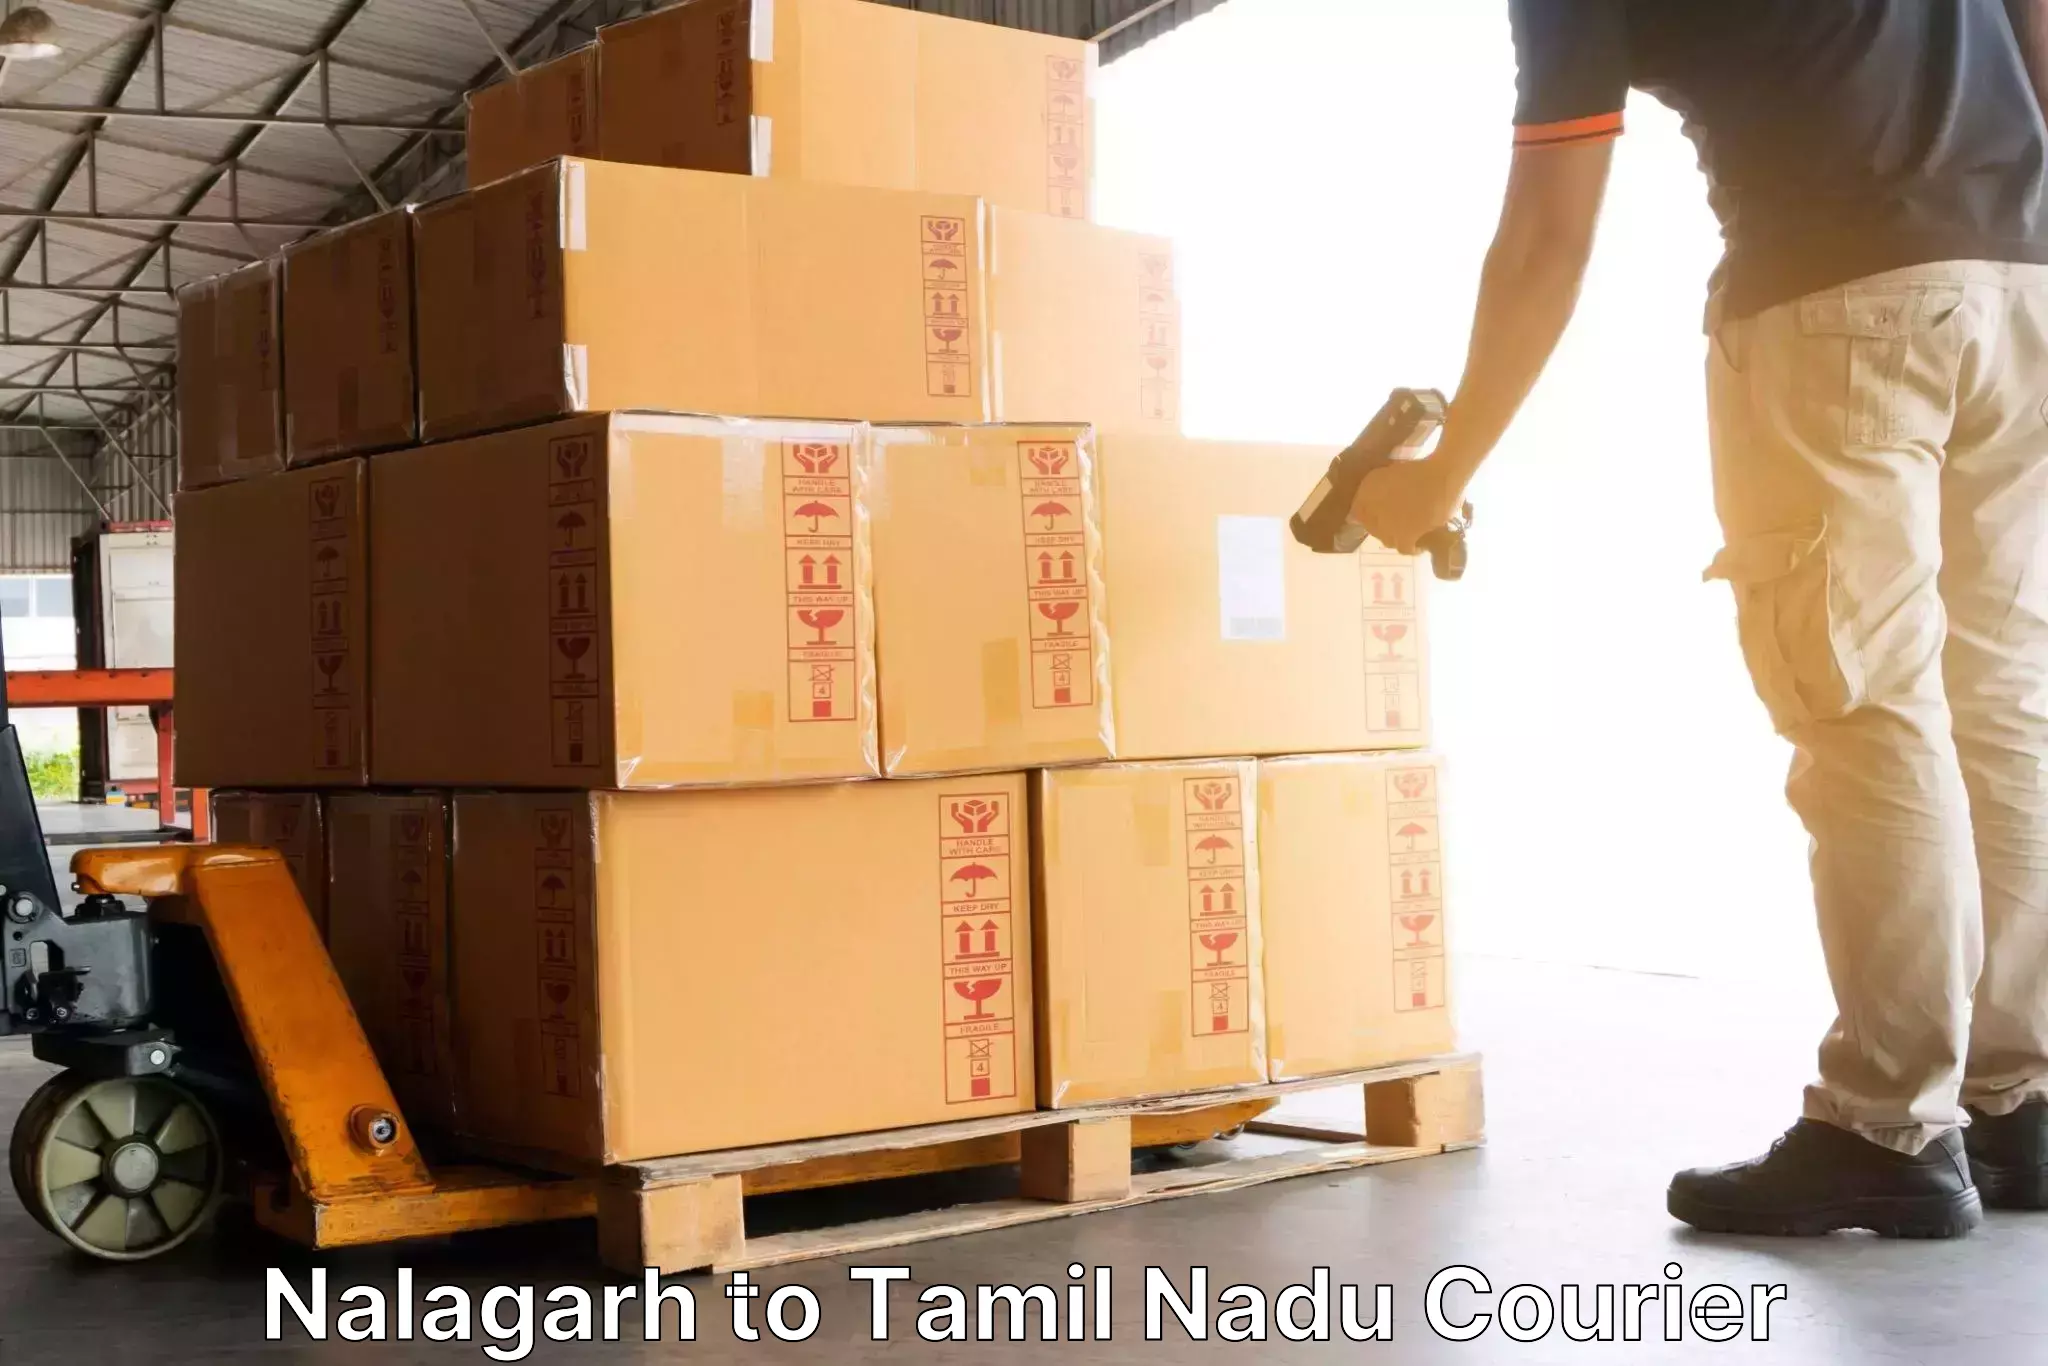 Rapid shipping services Nalagarh to Ennore Port Chennai